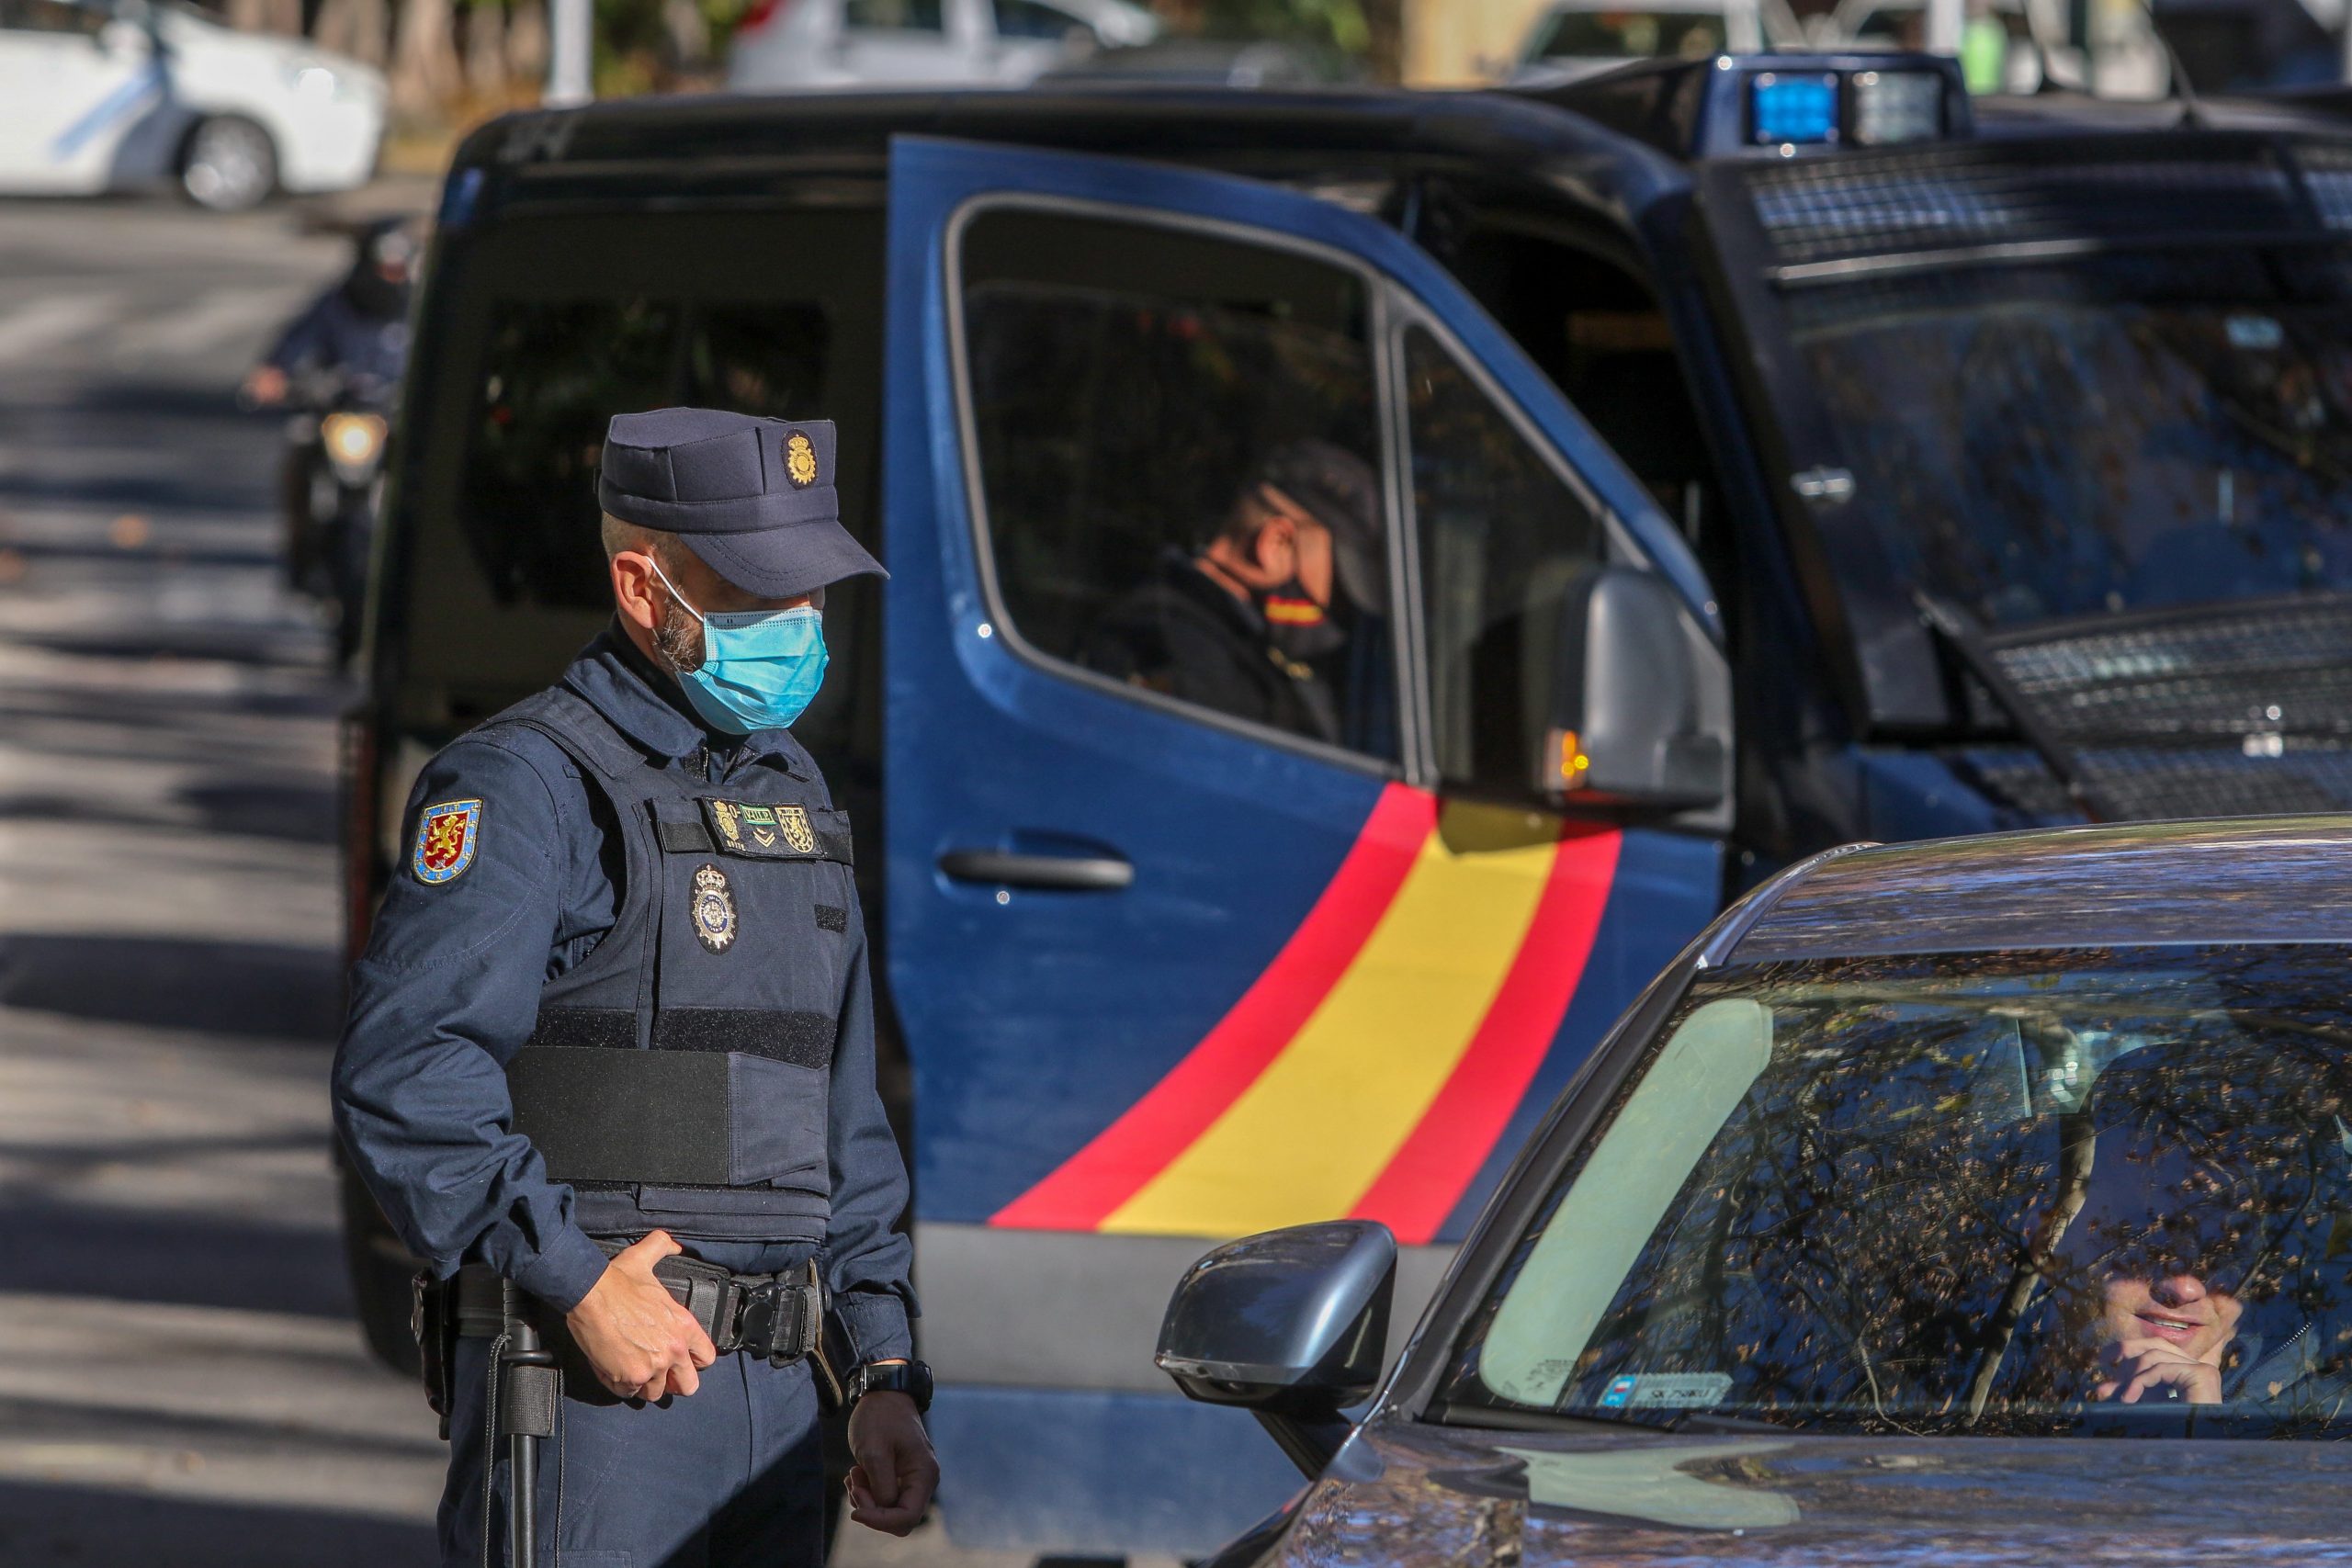 British fugitive to be extradited after two arrests within days in Spain's Malaga area